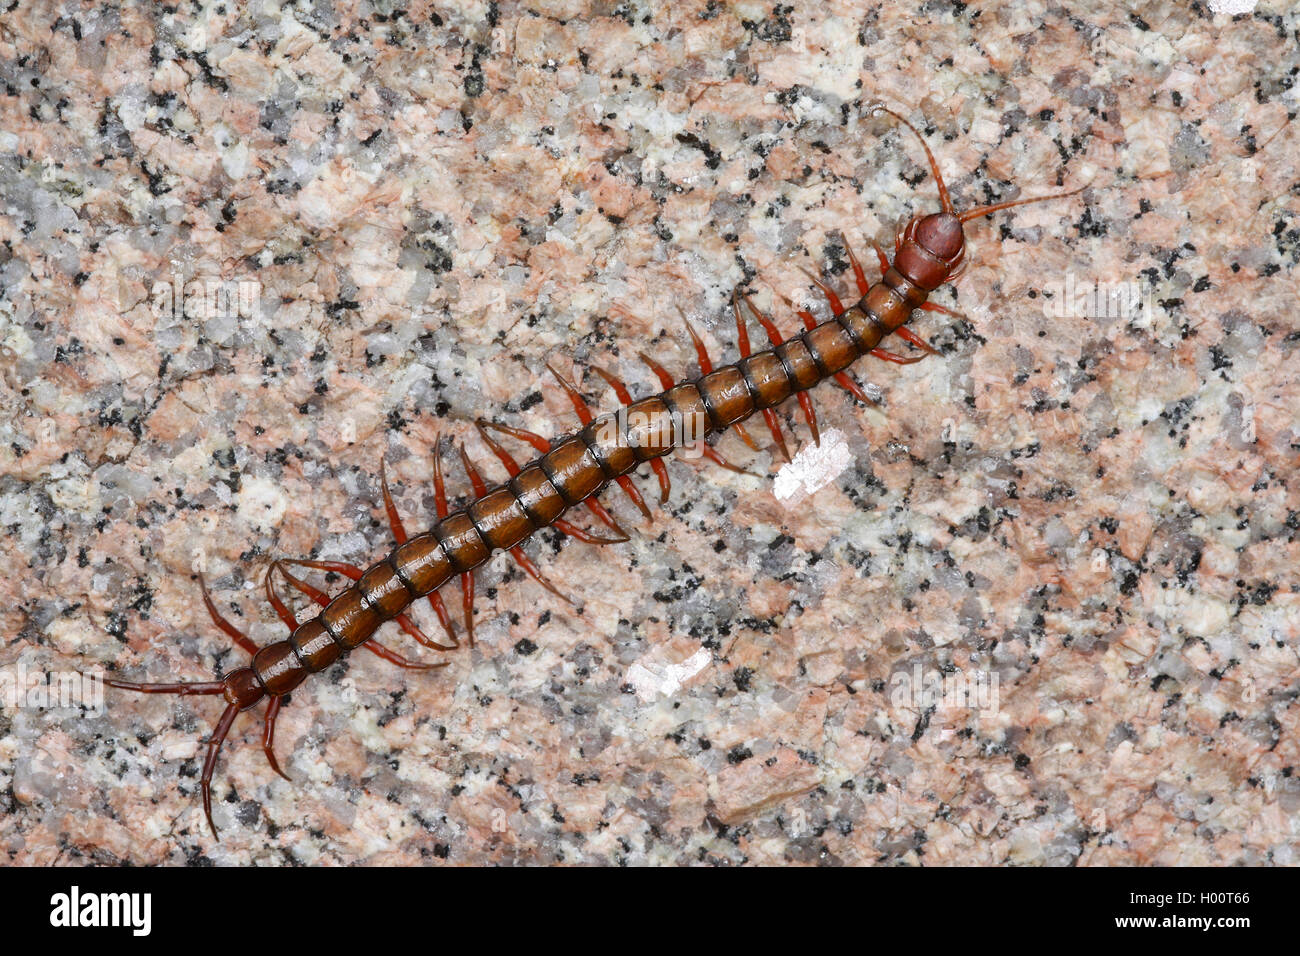 Chinese Red Head, Giant Centipede, Jungle Centipede, Orange Legged Centipede, Red Headed Centipede, Vietnamese Centipede (Scolopendra subspinipes), on a stone, Seychelles Stock Photo